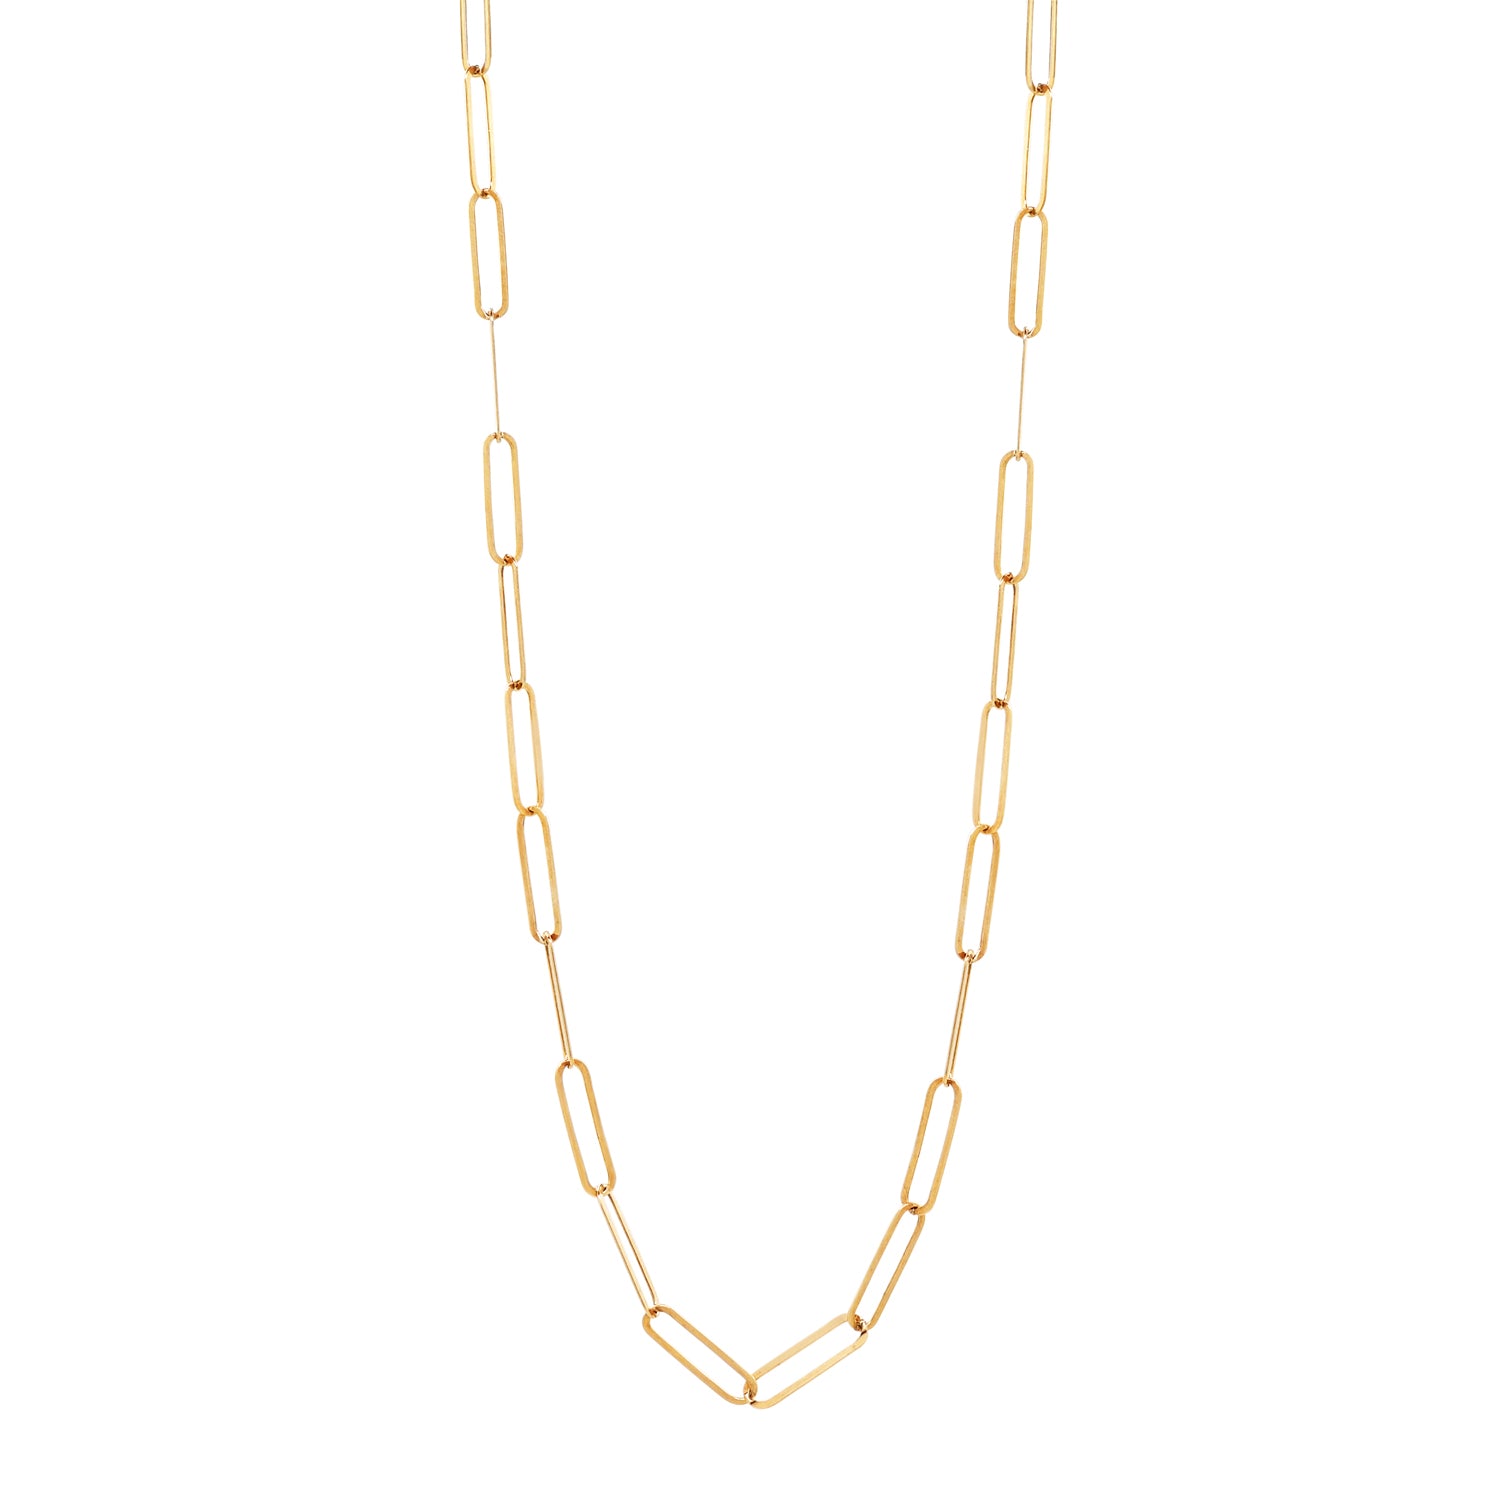 4.5mm Paper Clip Link Chain Necklace in Hollow 14K Gold - 31.5